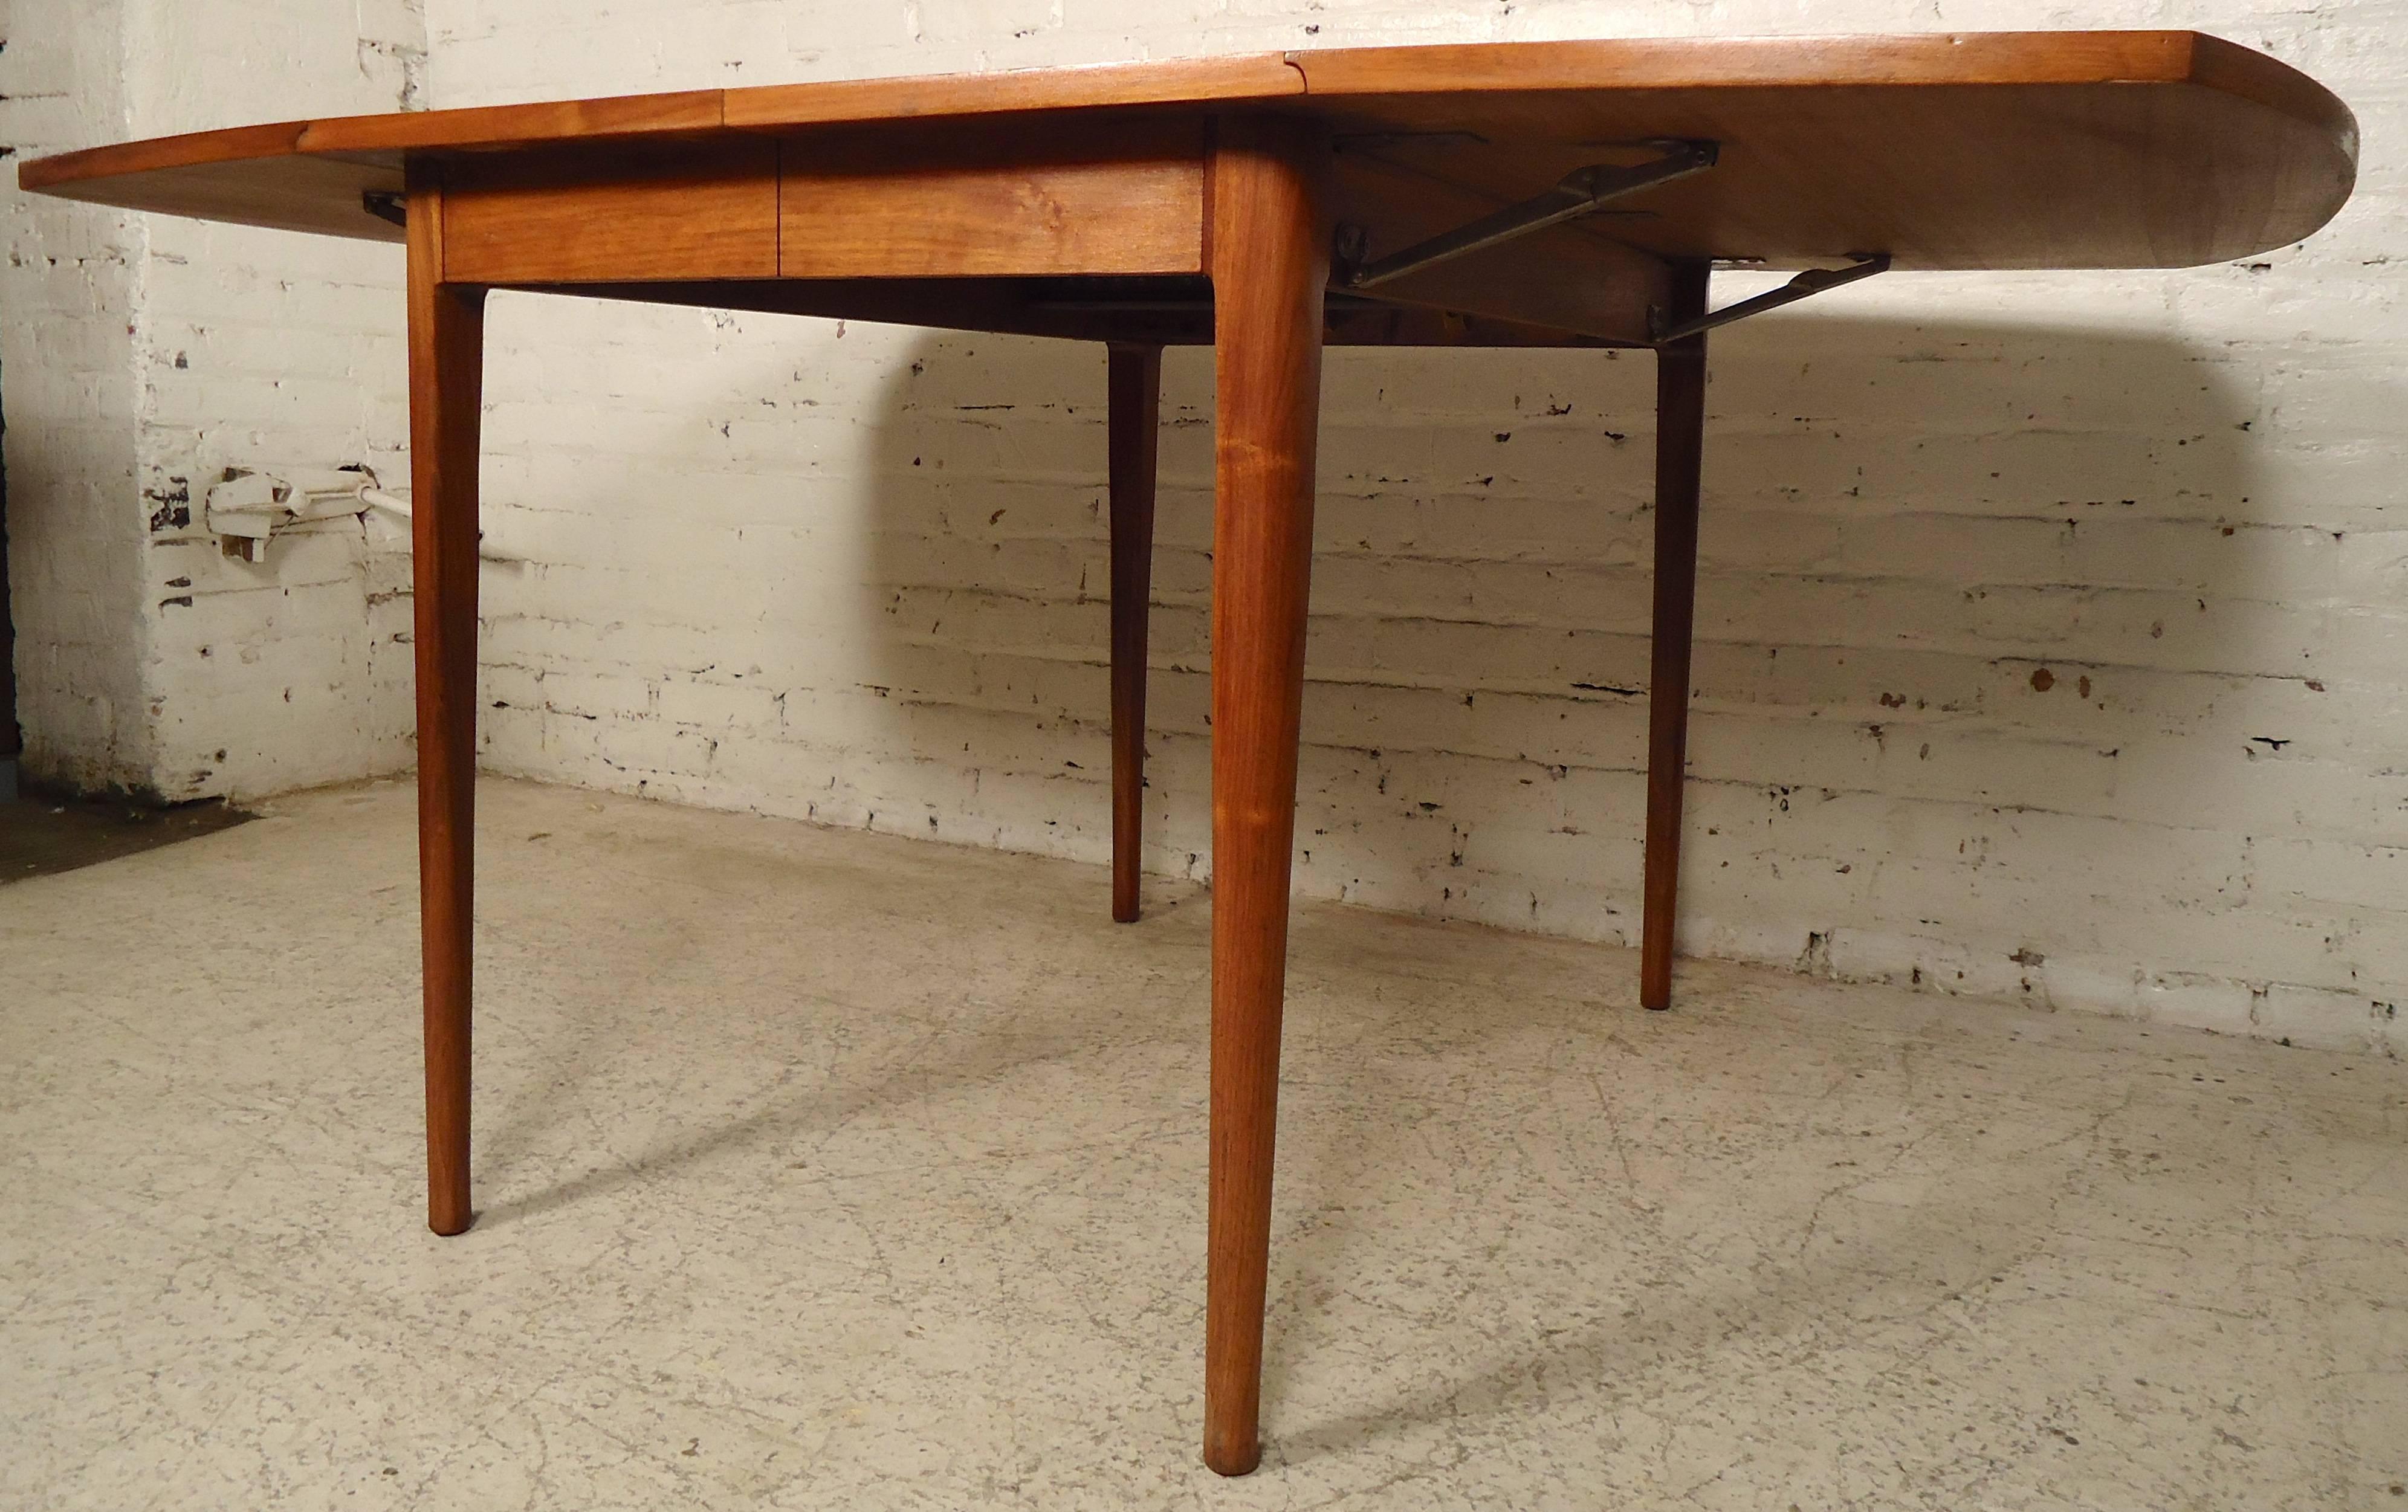 Refinished vintage dining table designed by Kipp Stewart for Drexel features warm walnut grain throughout, rounded drop leaves, and space for additional leaves.
Open: 62